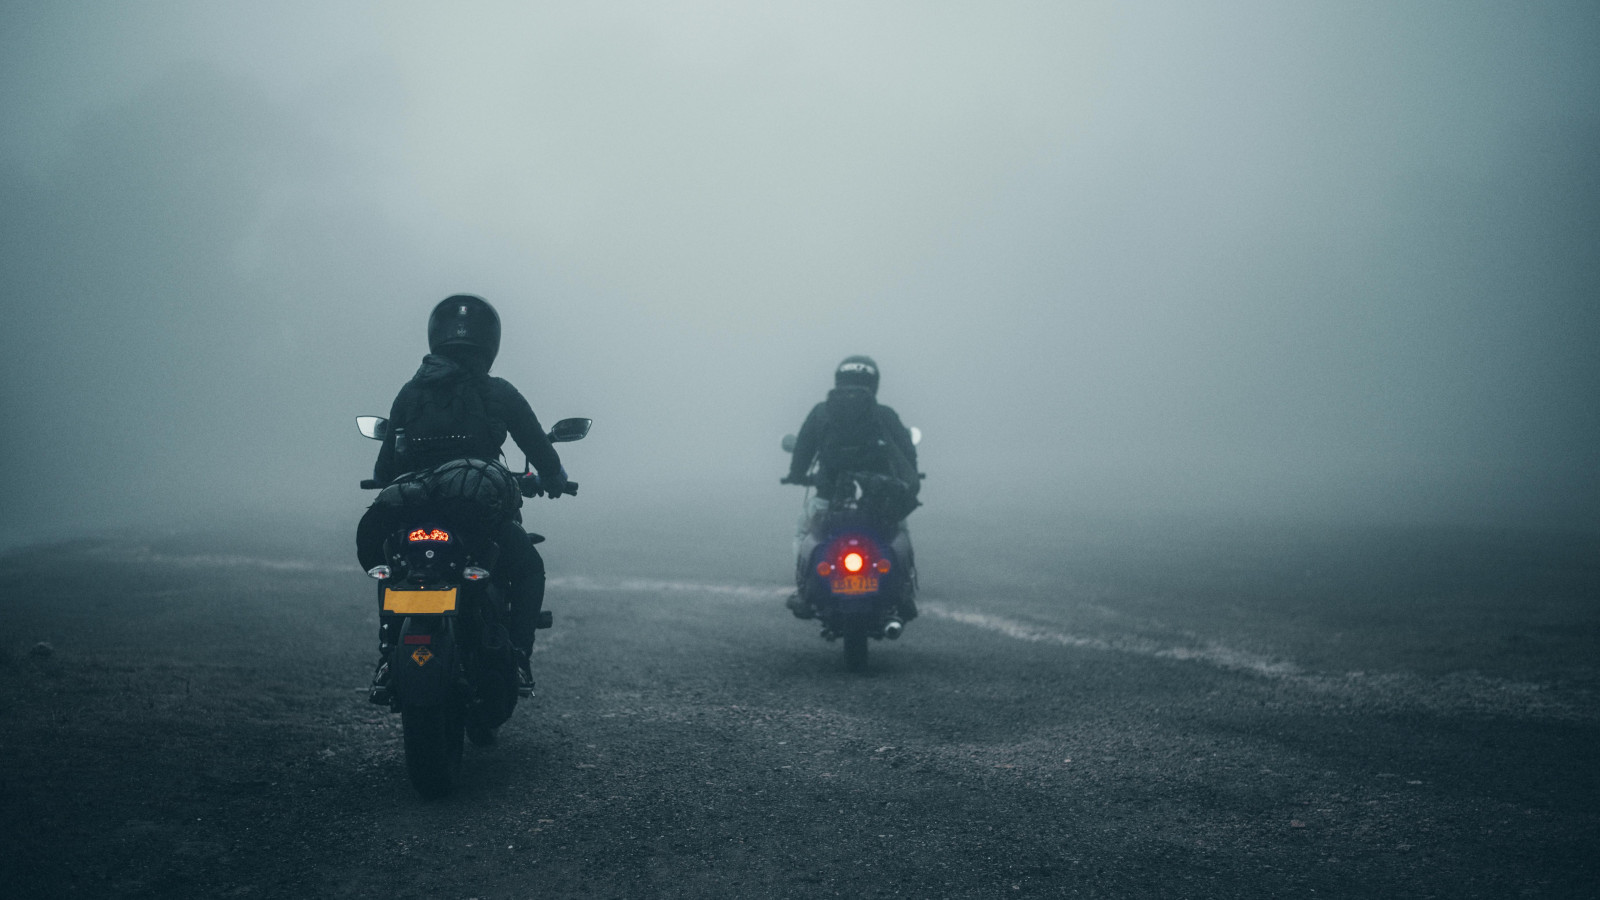 motorcycle riding in foggy weather